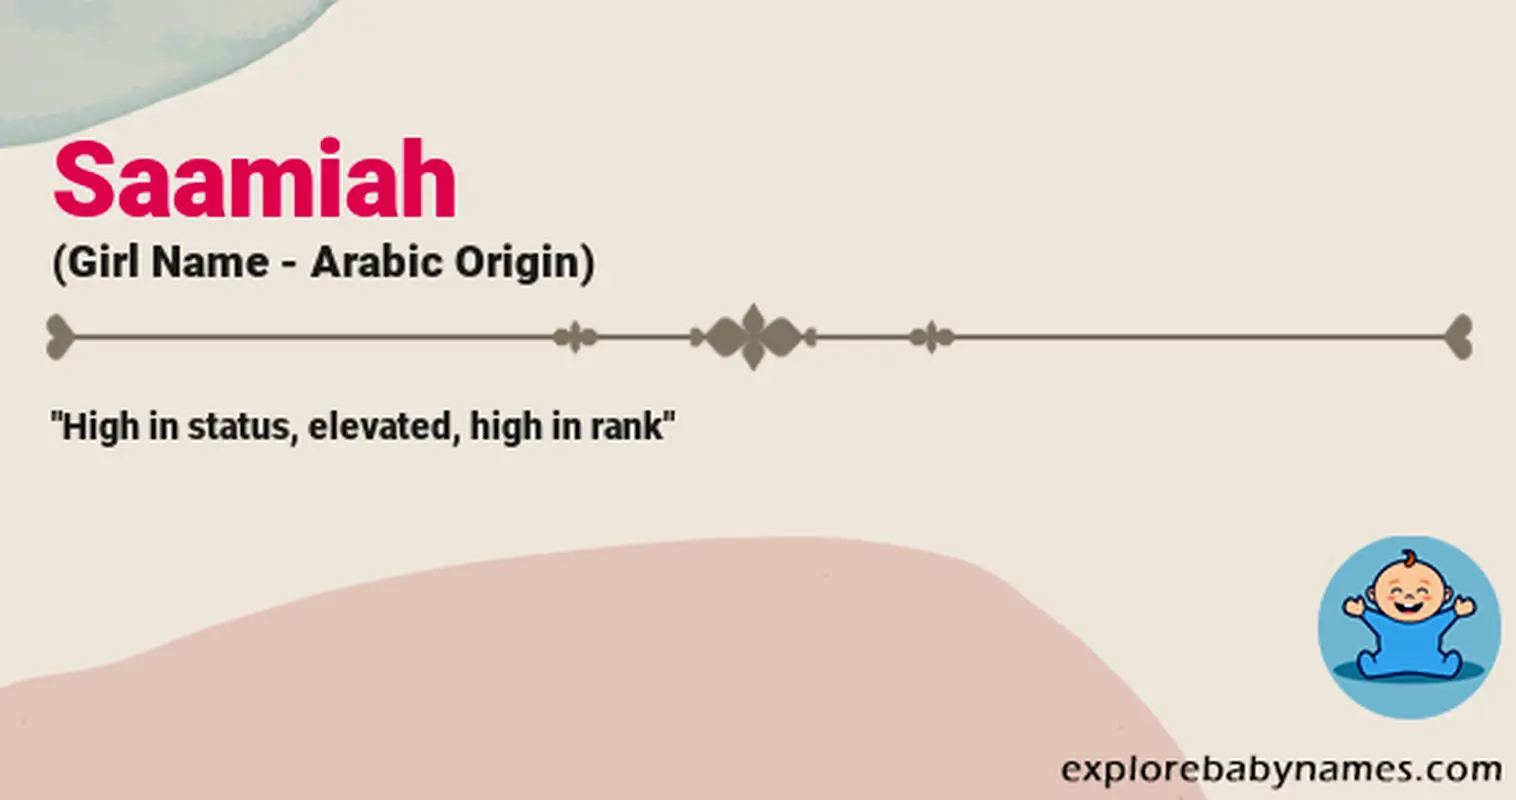 Meaning of Saamiah